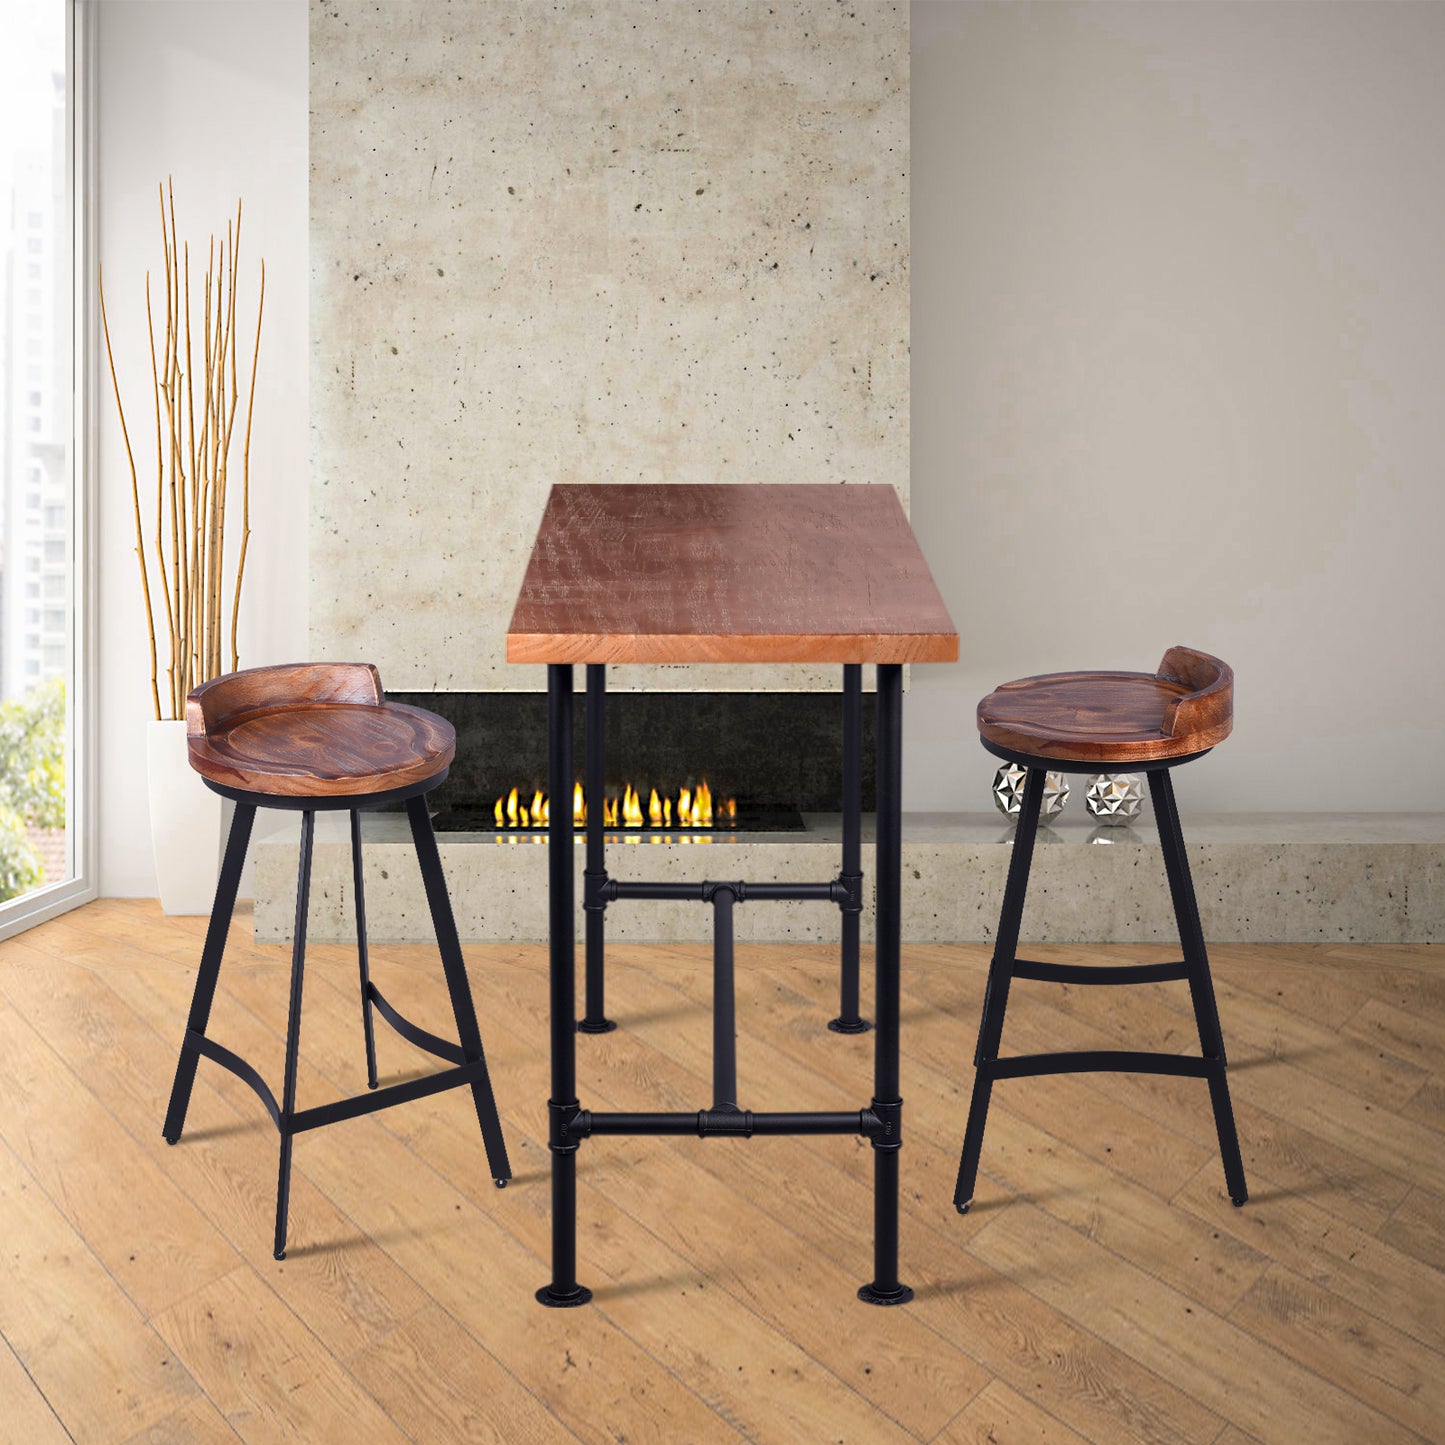 Industrial 41.3inch Height Bar Table Vintage Pipe Design Bistro Table Rustic Kitchen Dining Breakfast Desk Farmhouse Office Computer Desk Wooden Top Pub Coffee Table(Desktop:47.3"*23.6")